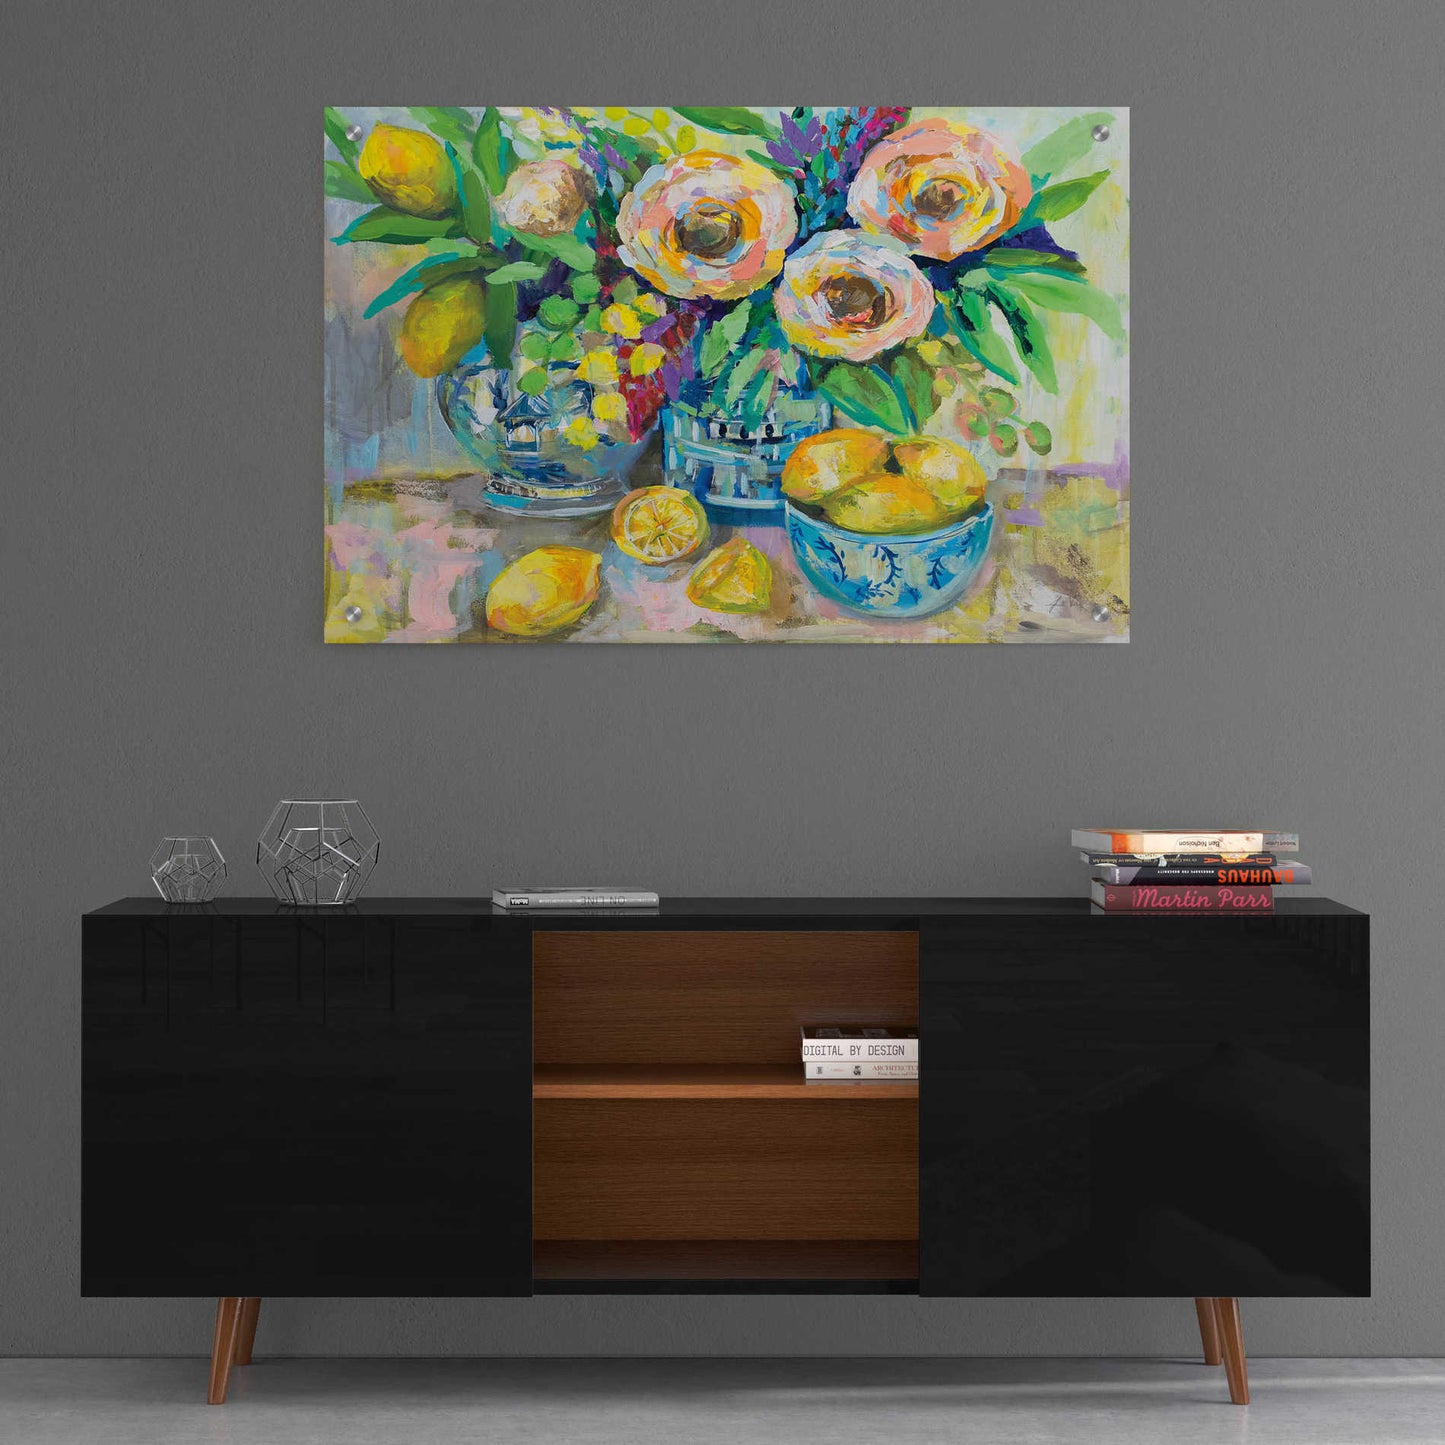 Epic Art 'Afternoon Lemonade' by Jeanette Vertentes, Acrylic Glass Wall Art,36x24